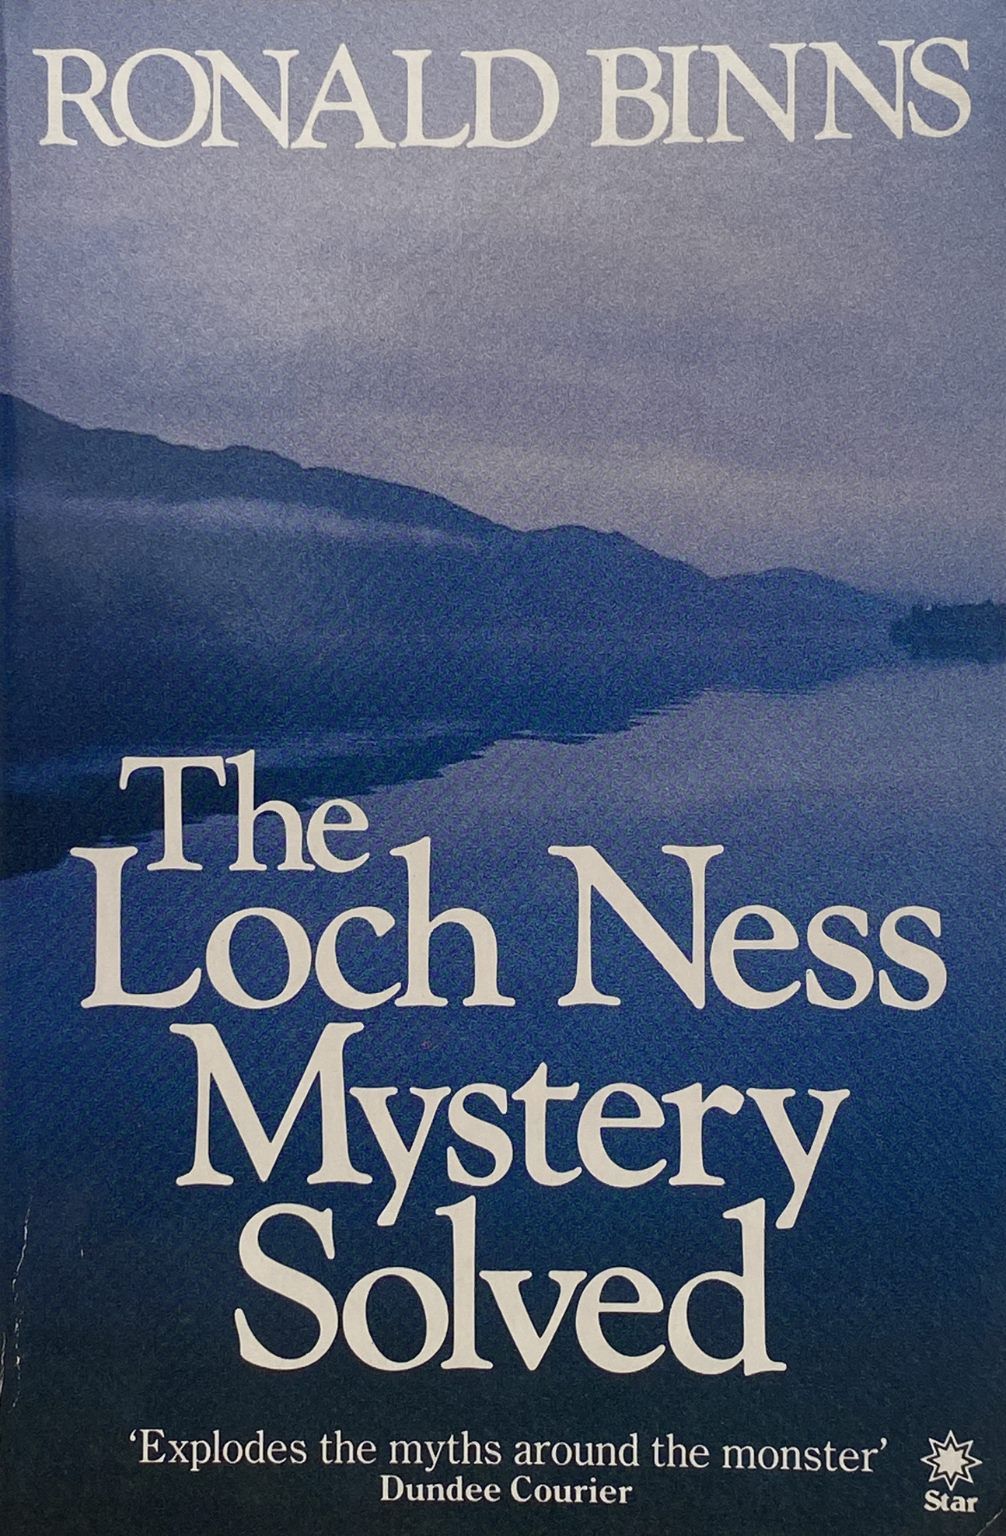 THE LOCH NESS MYSTERY SOLVED